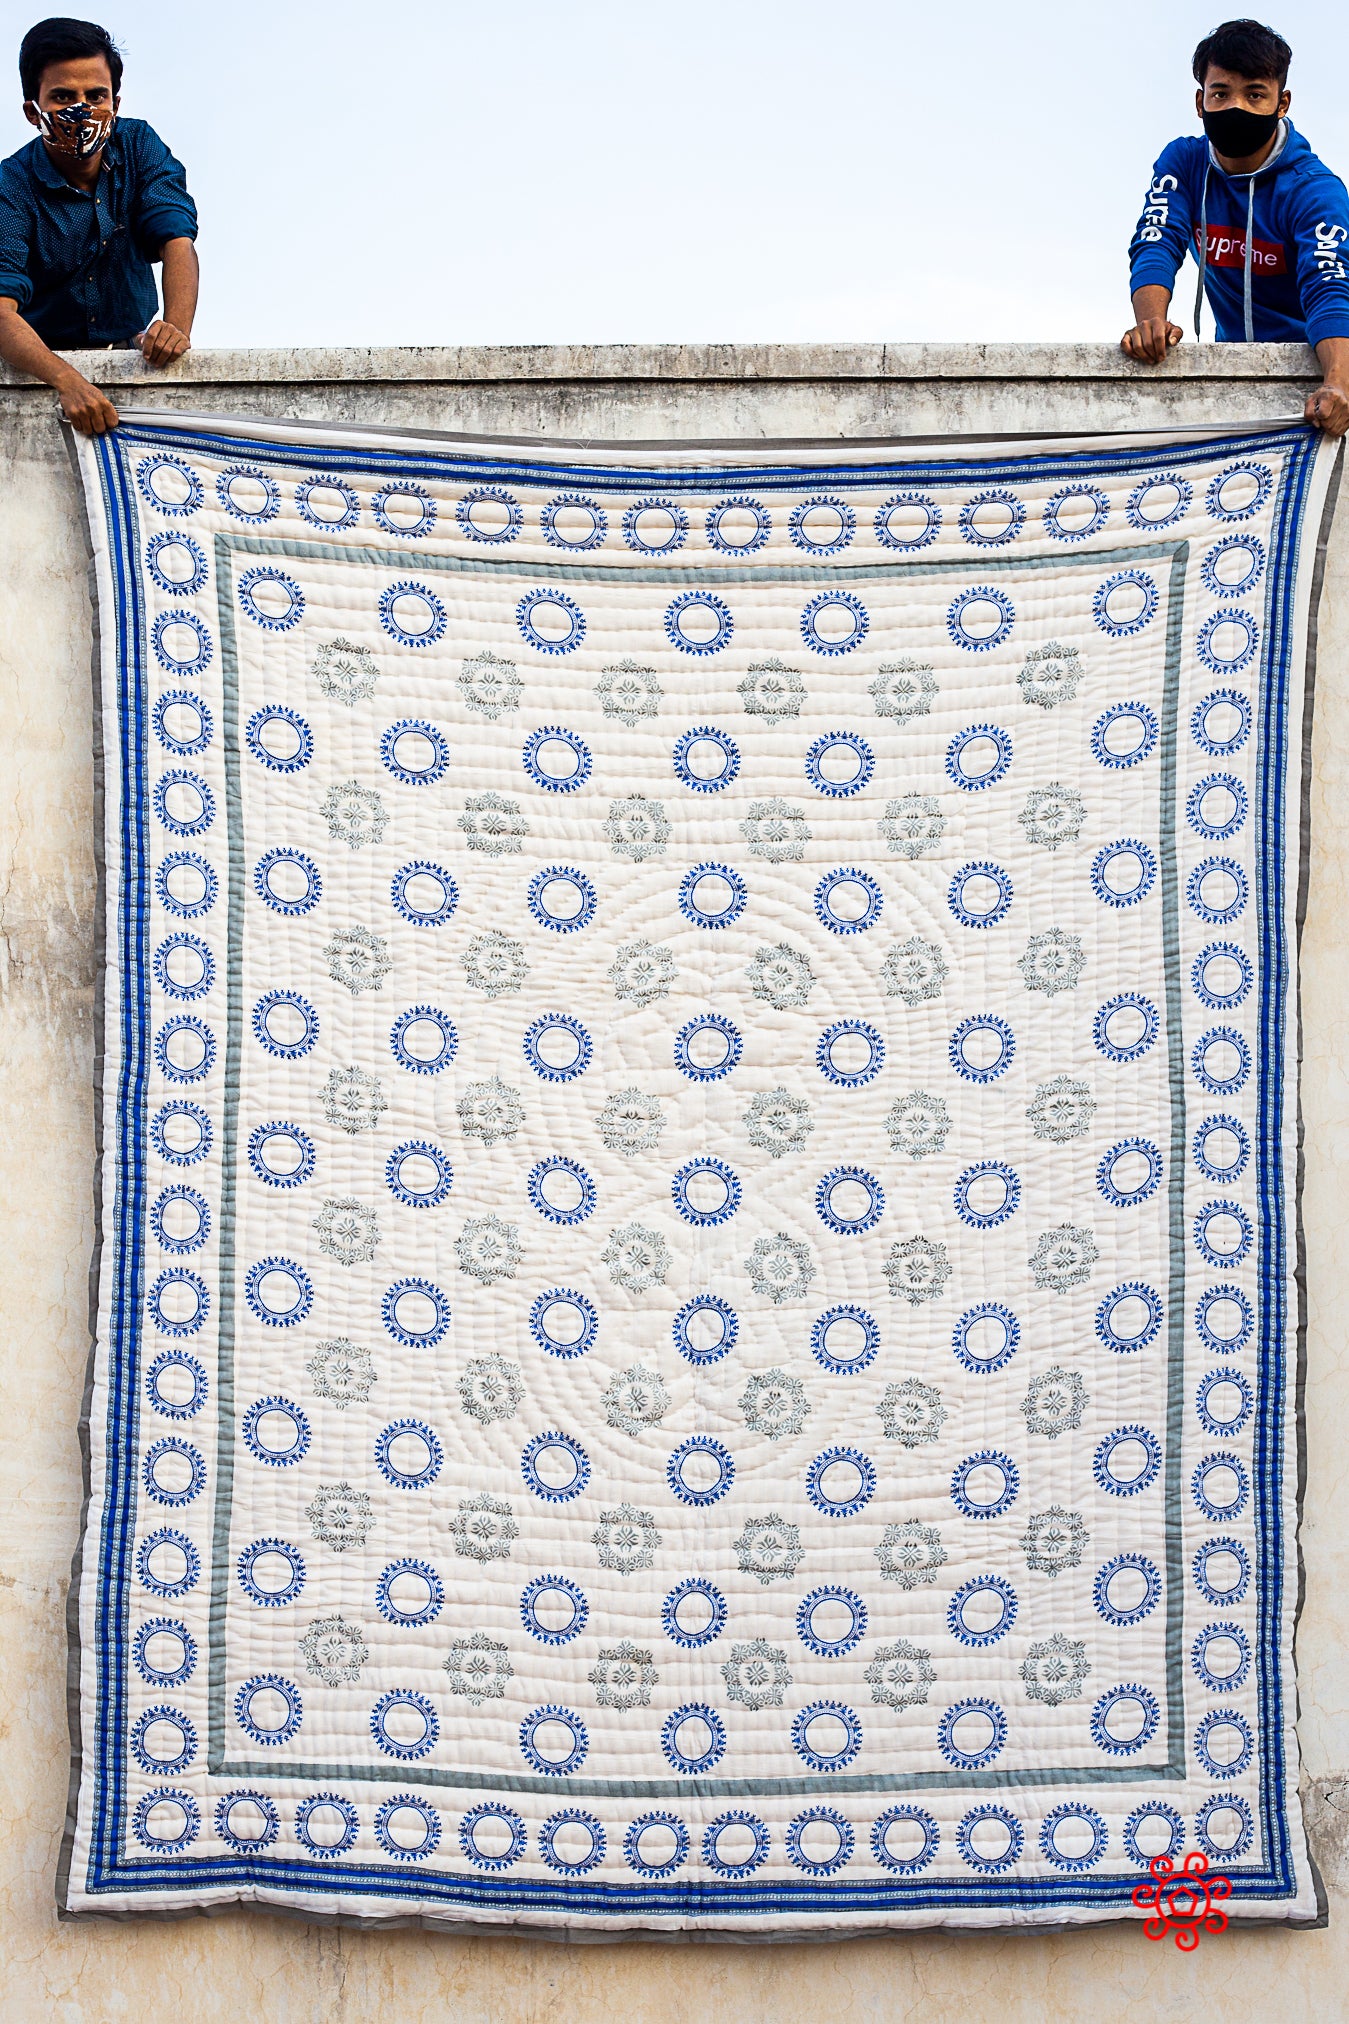 Queen Quilt,100 Percent Handmade, Hand Block printed Quilt, Jaipuri Quilt, Hand Quilted, Natural Cotton filling, Check Gray and Blue QBP 405